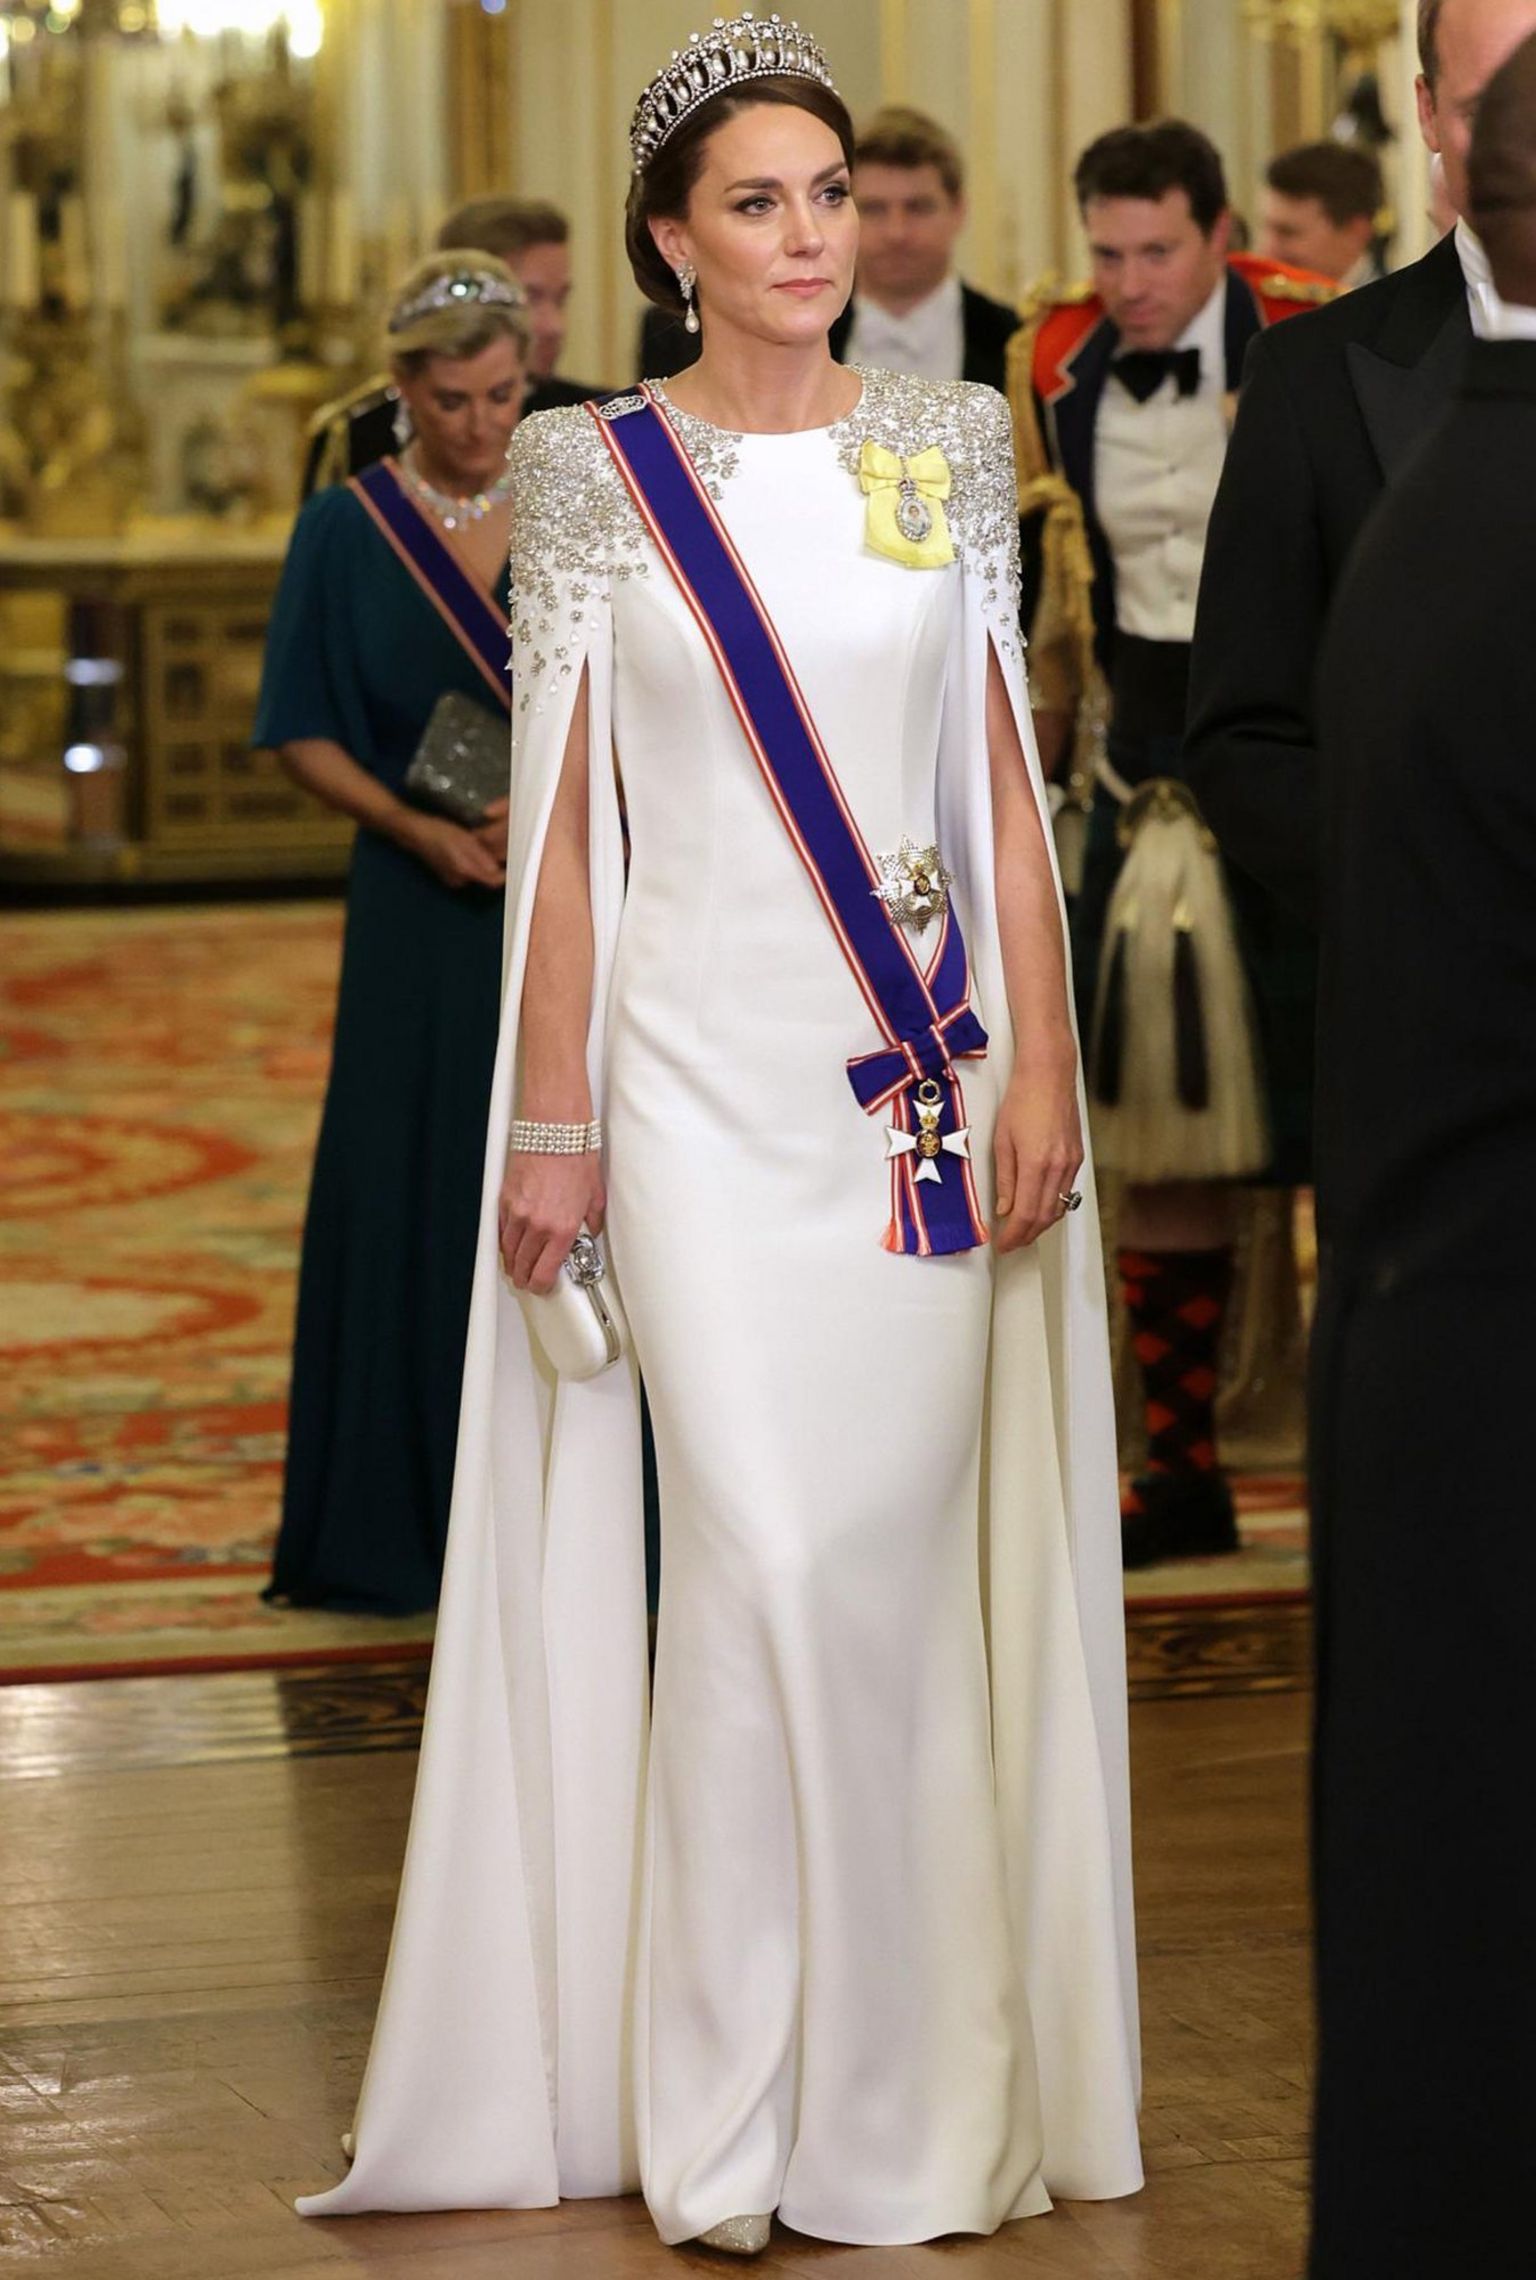 The Princess of Wales wearing